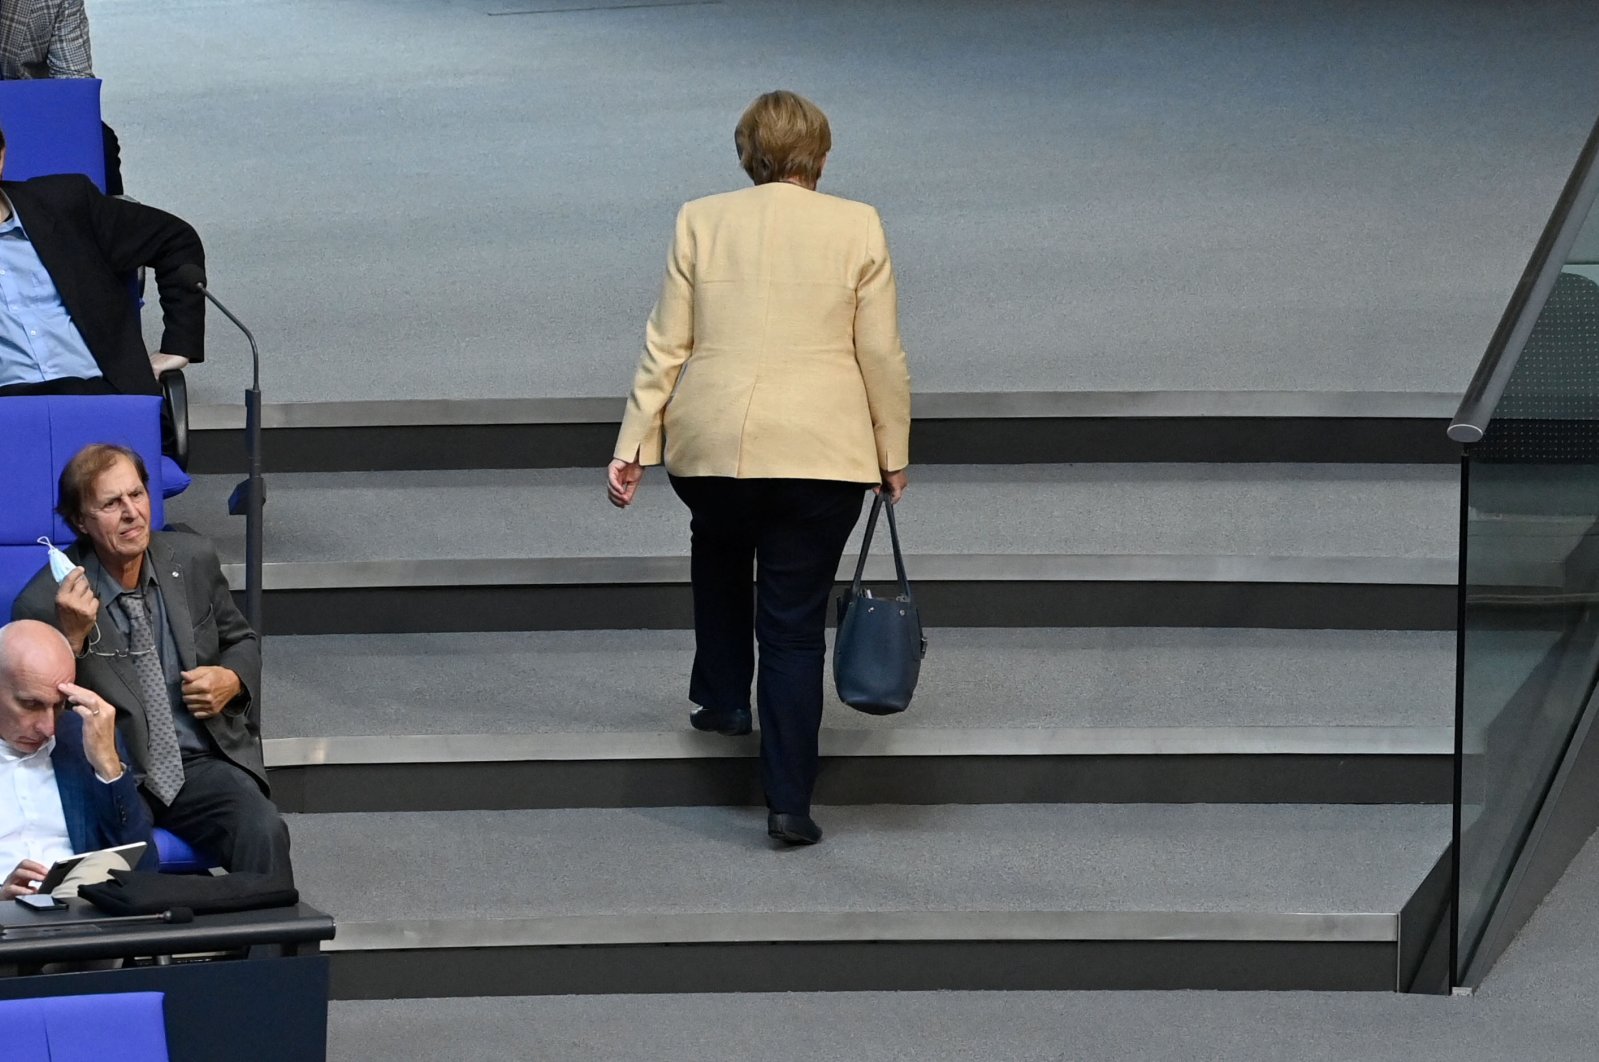 German Chancellor Angela Merkel leaves the plenary hall during a session at the Bundestag, the German lower house of parliament, in Berlin, Germany, Sept. 7, 2021. (AFP Photo )